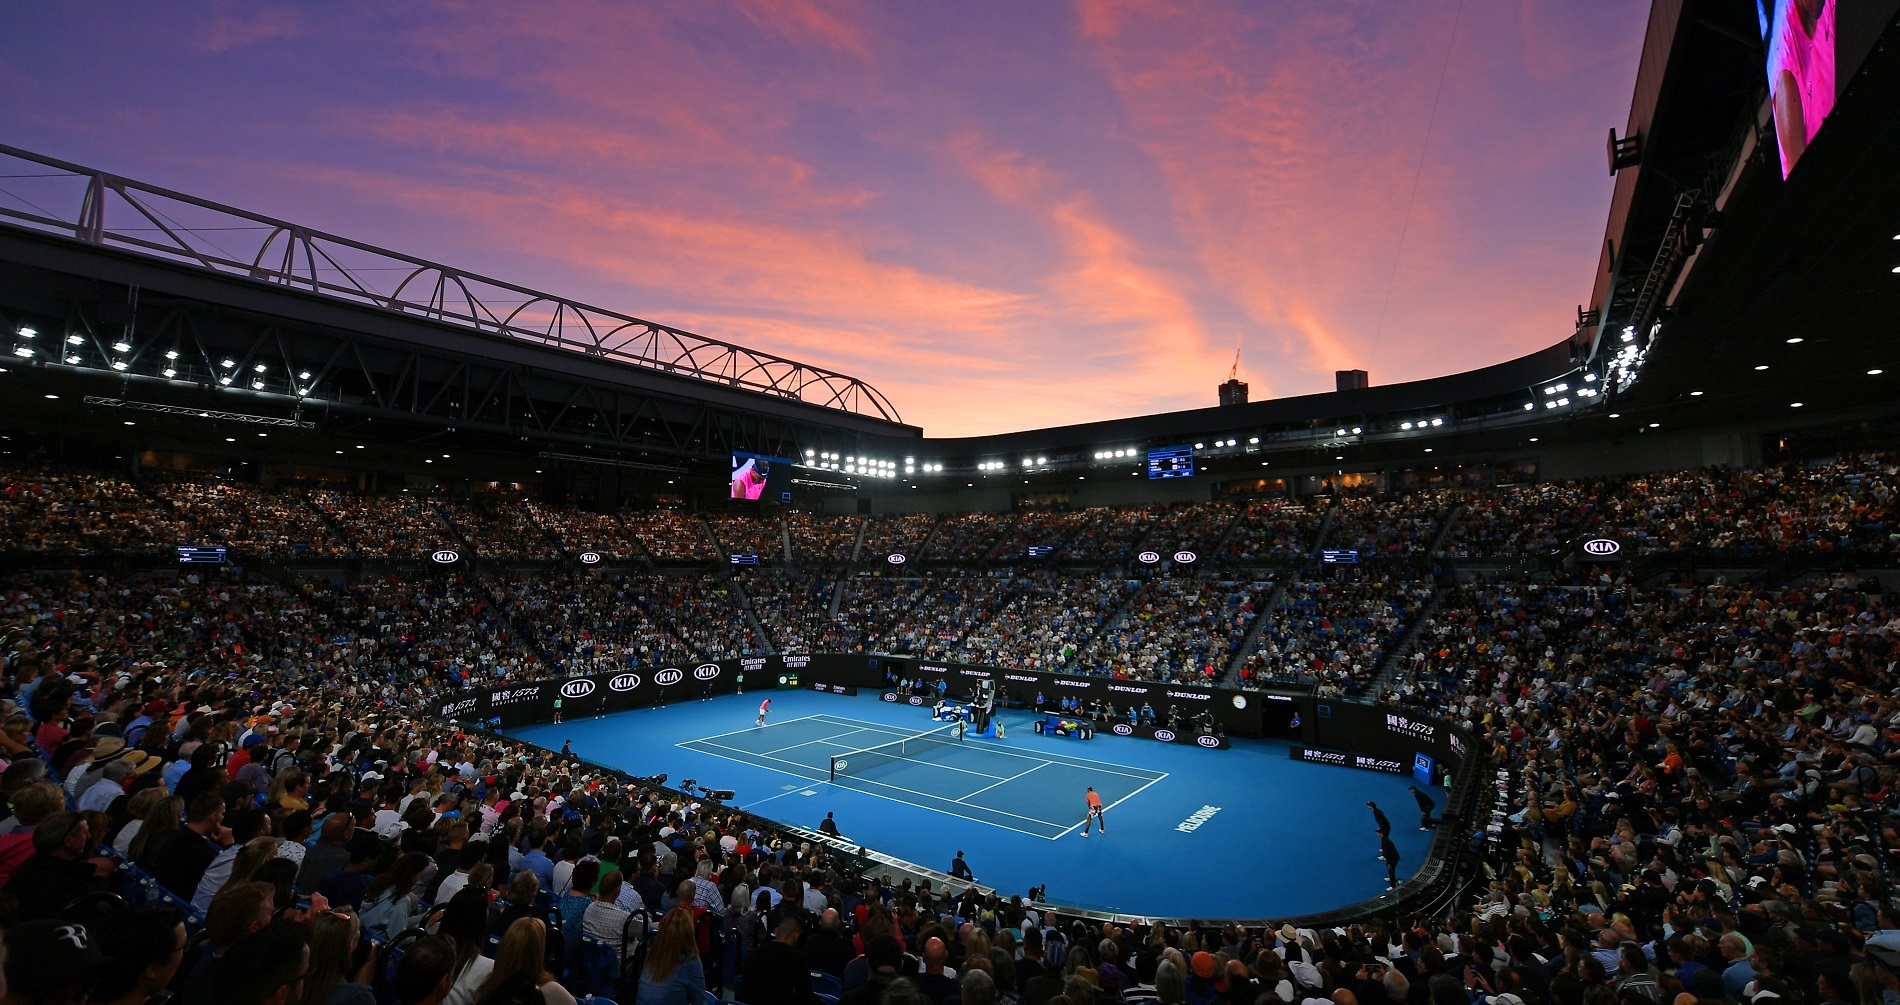 10 questions about the 2021 Australian Open - Tickets, schedule, TV broadcasts, money Tennis